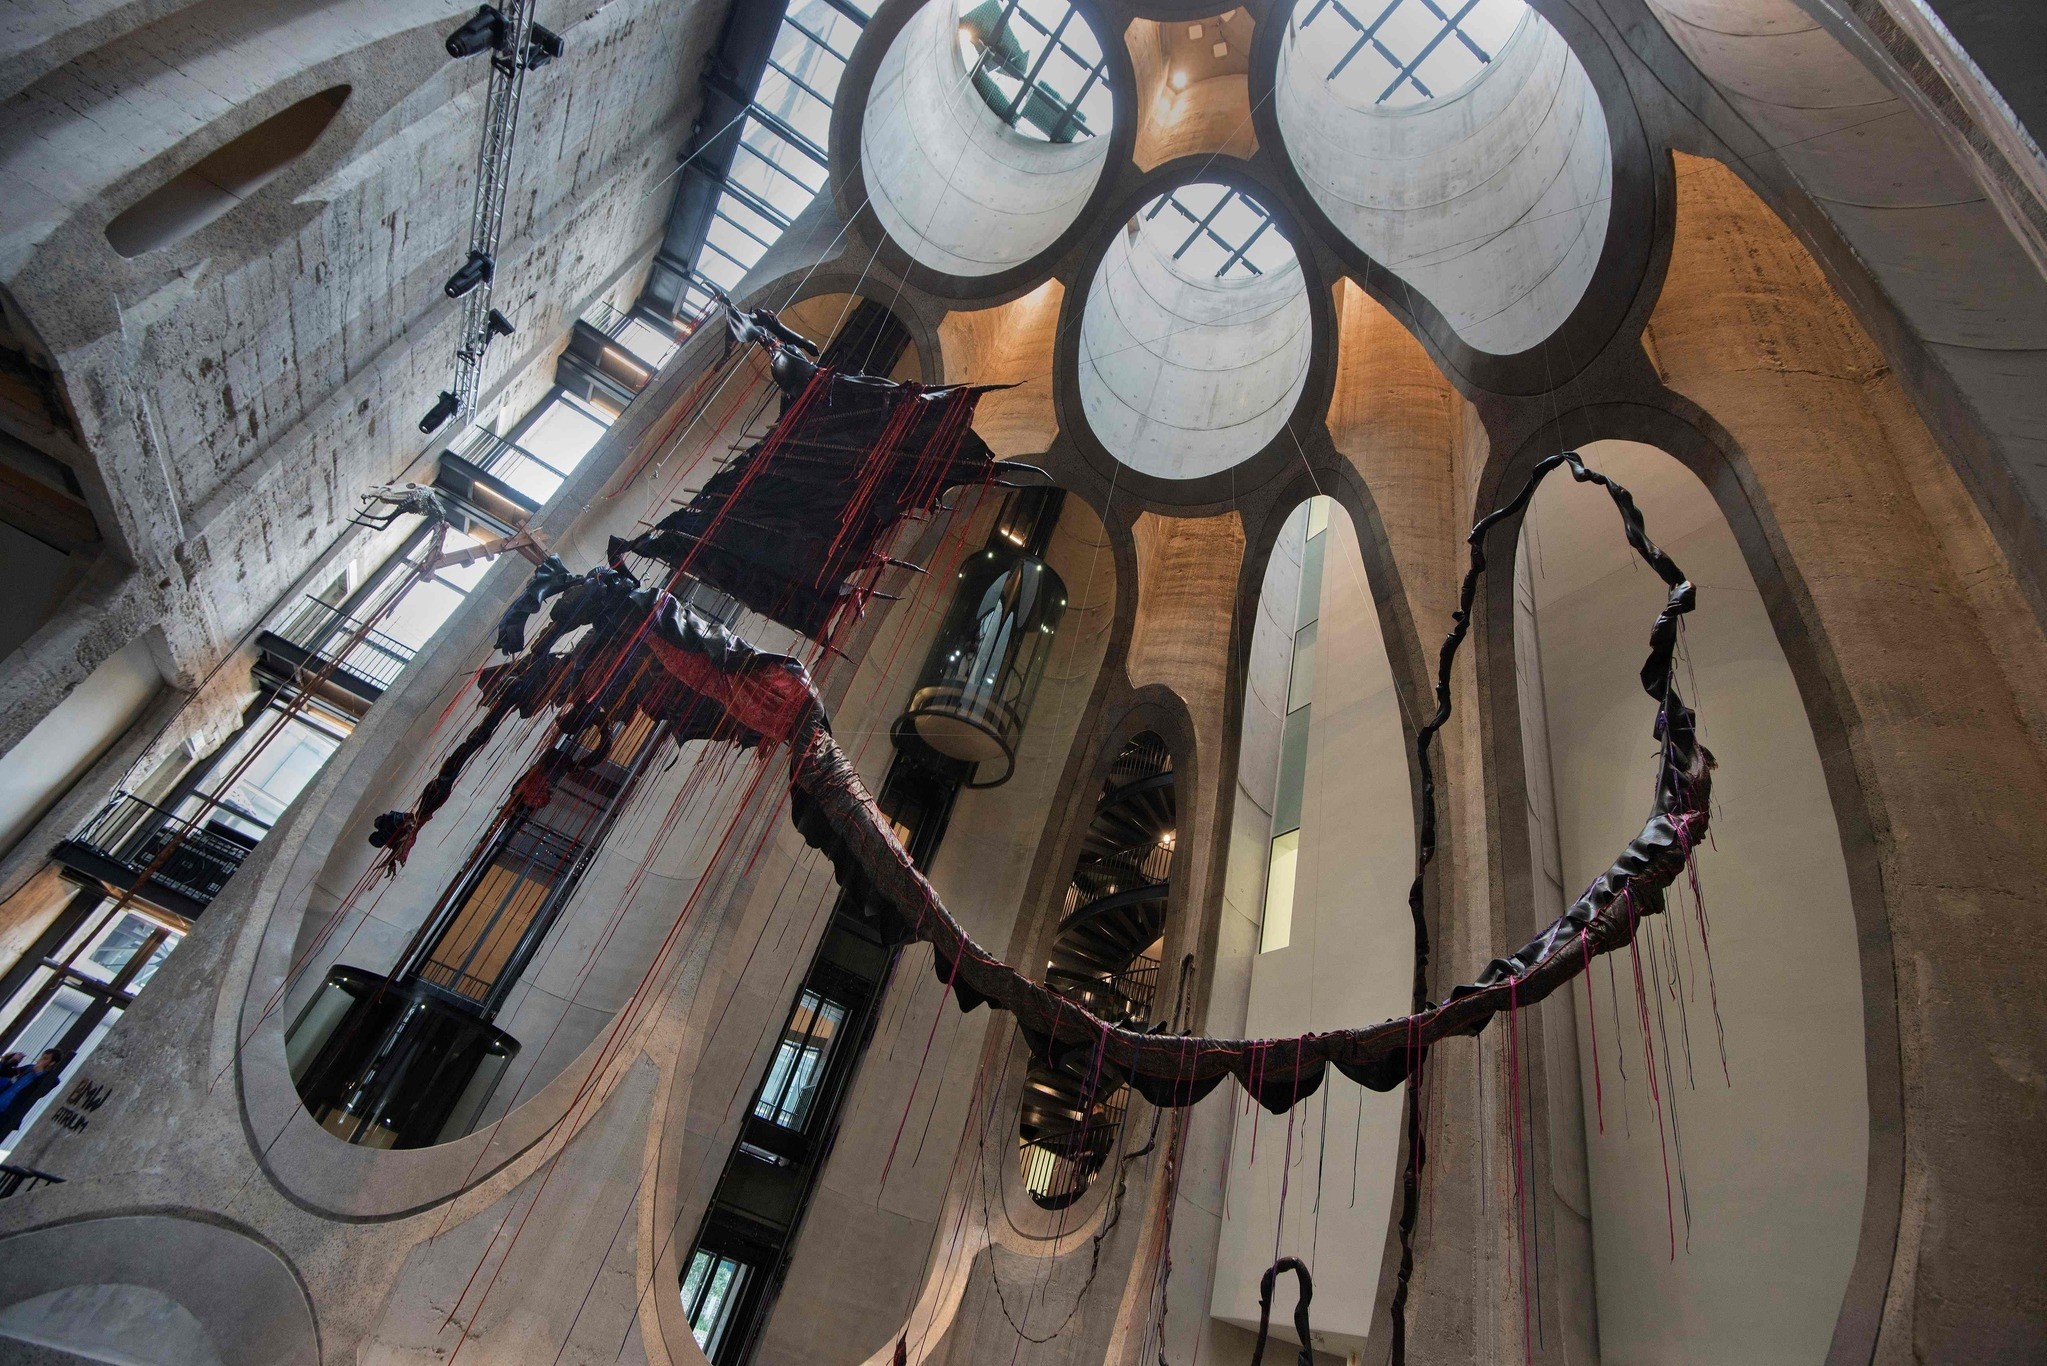 A sculpture by South African artist Nicholas Hlobo dominates the main hall in The Zeitz Museum of Contemporary African Art.